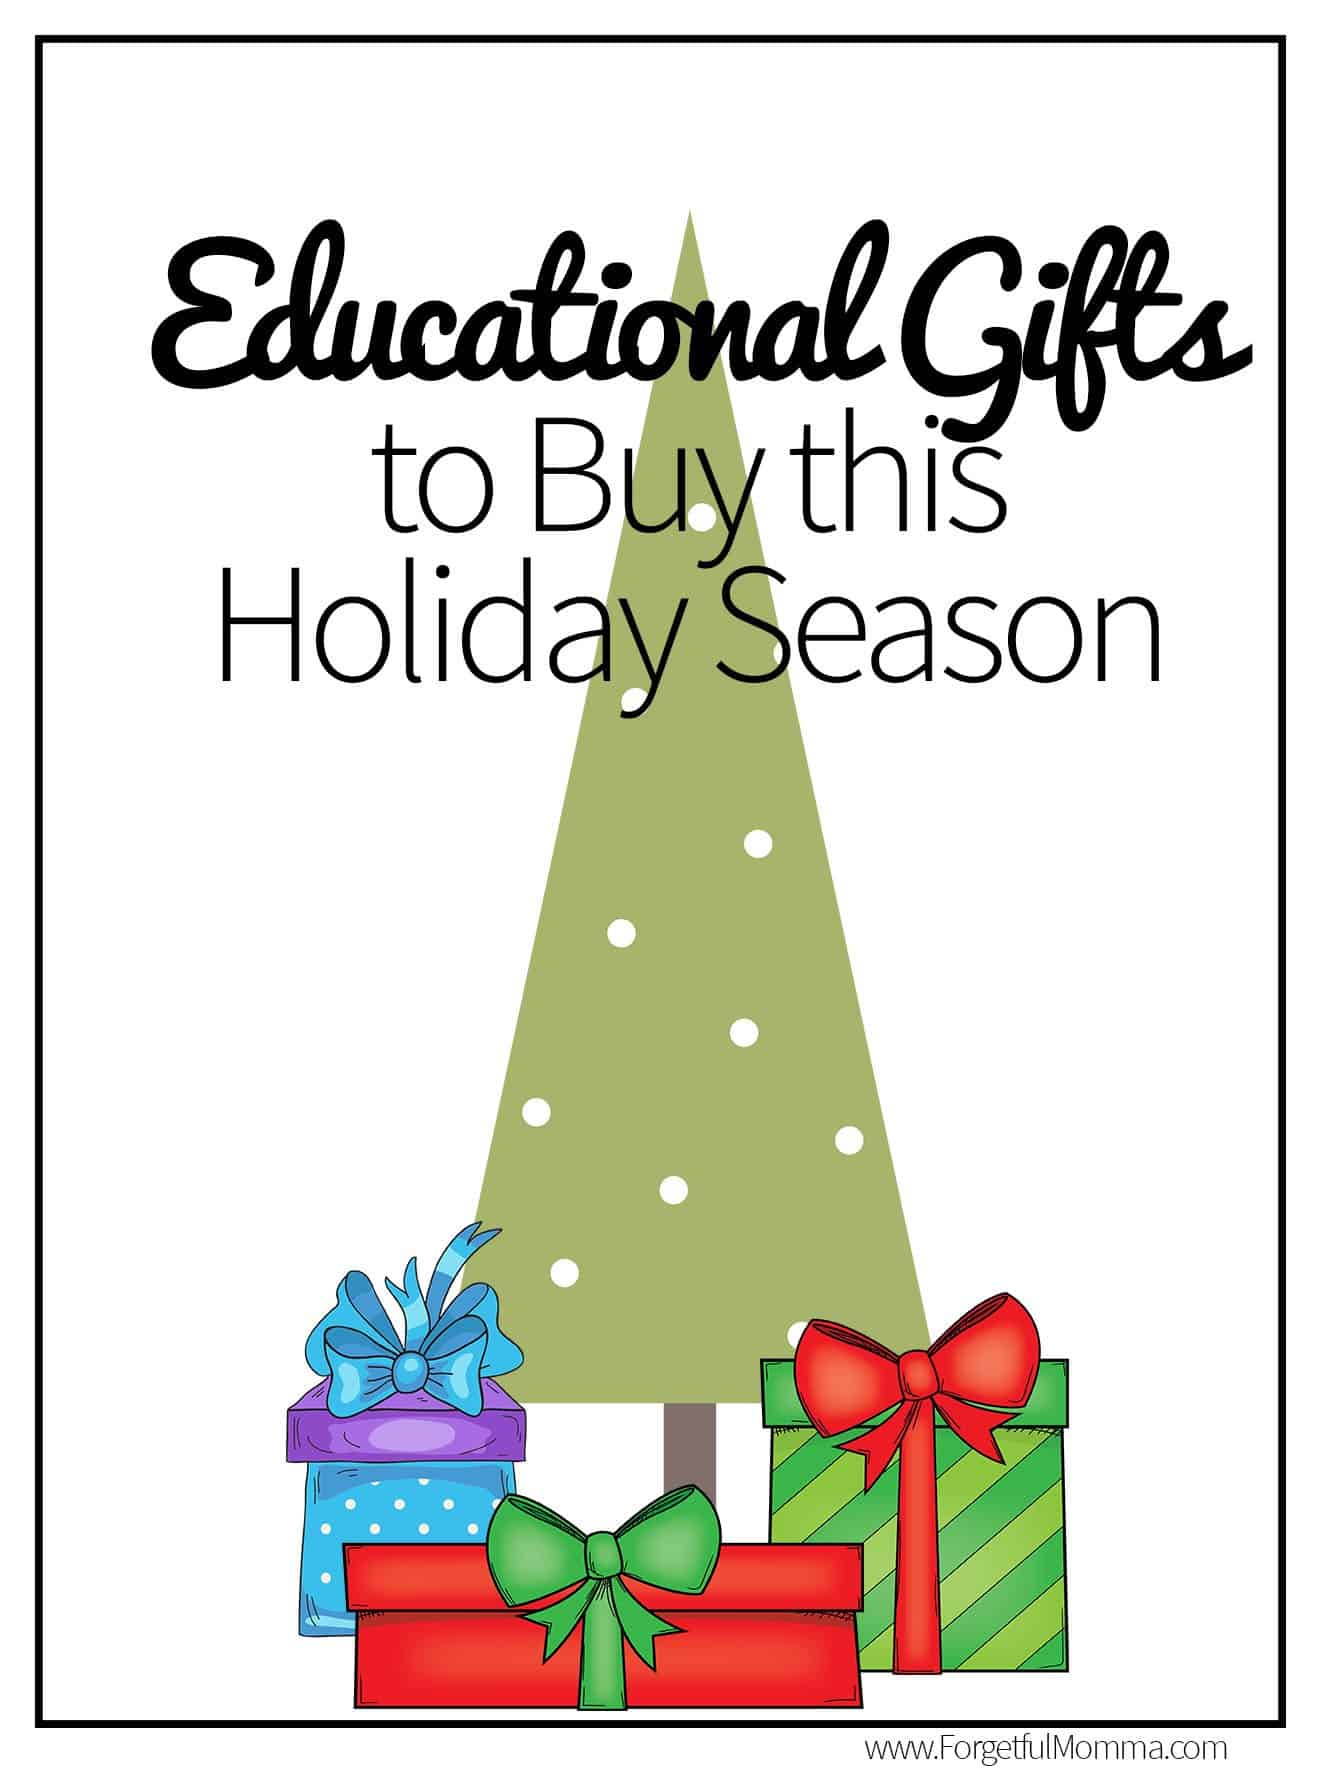 Educational Gifts to Buy this Holiday Season